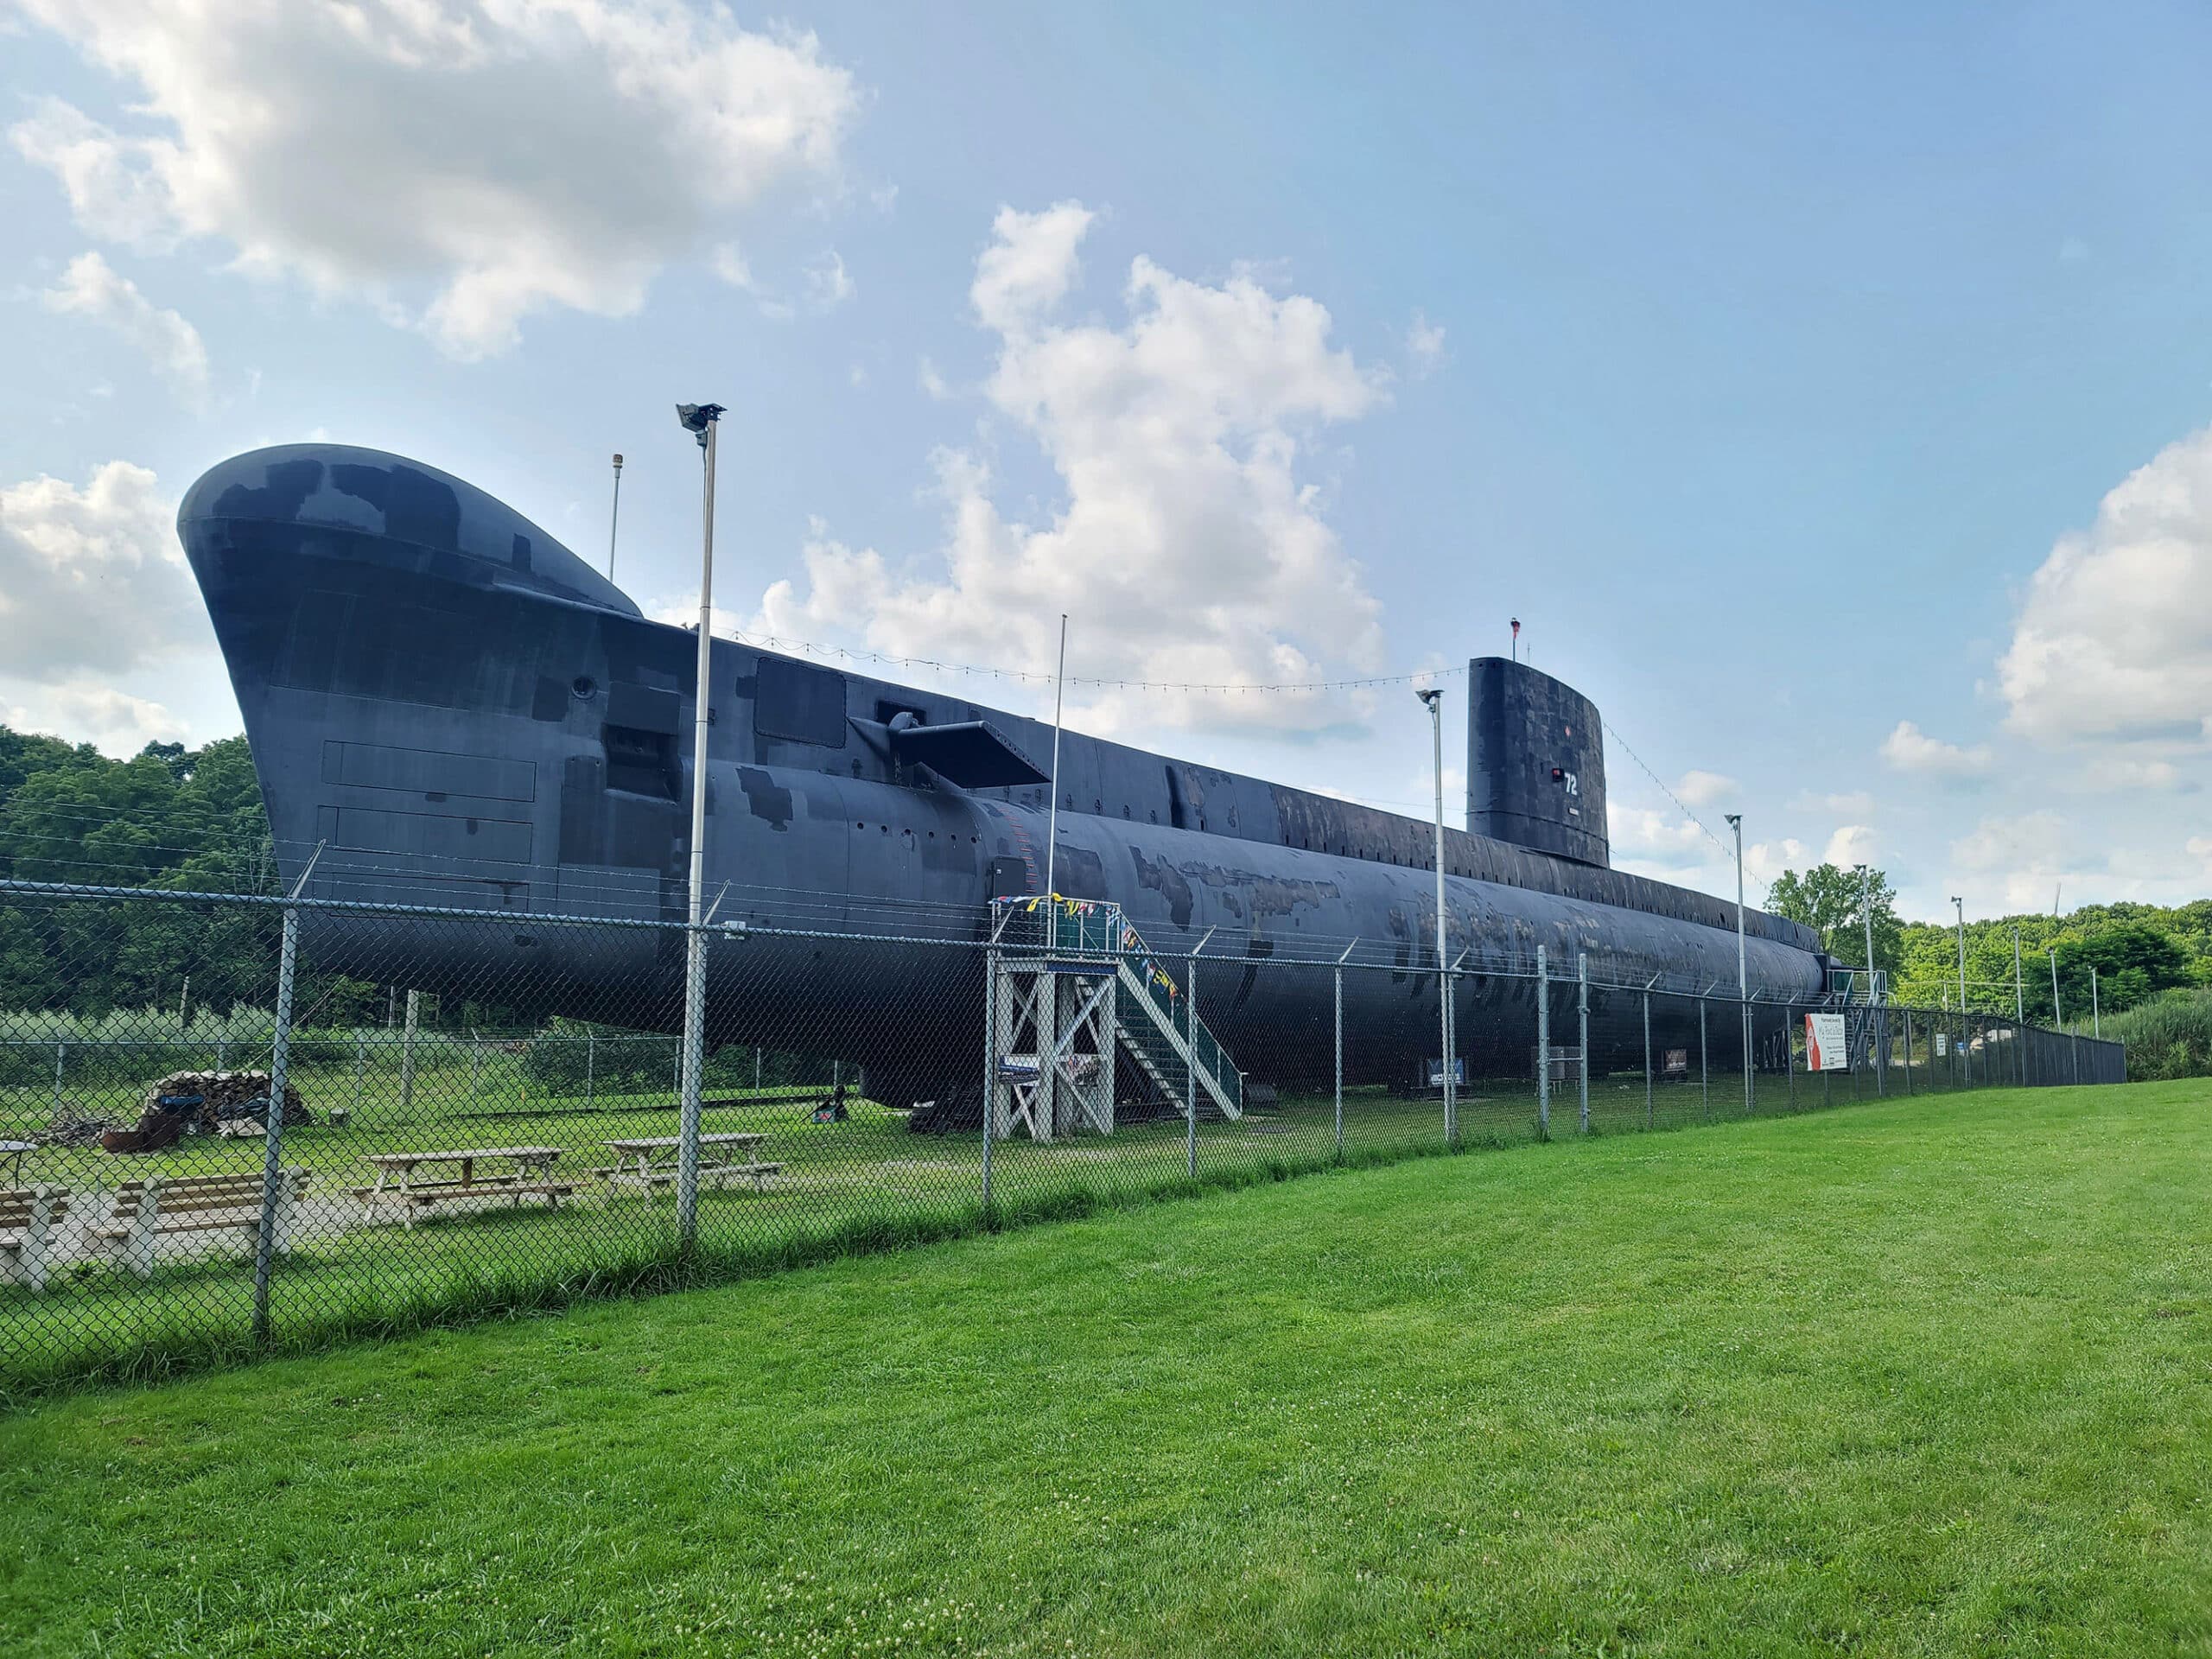 A large submarine on grass.